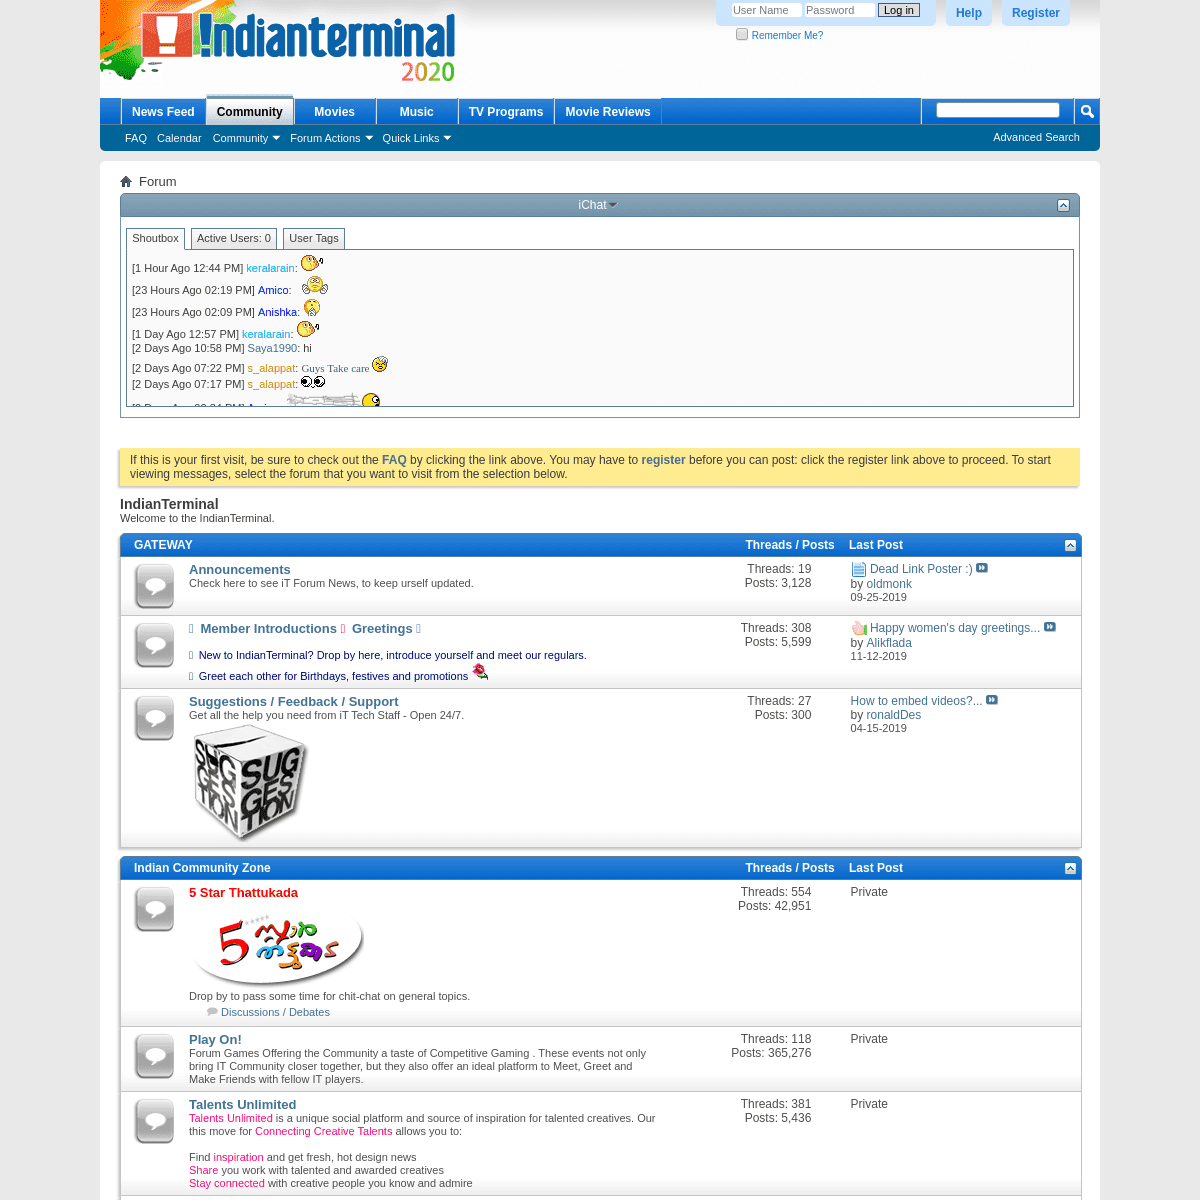 A complete backup of indianterminal.com